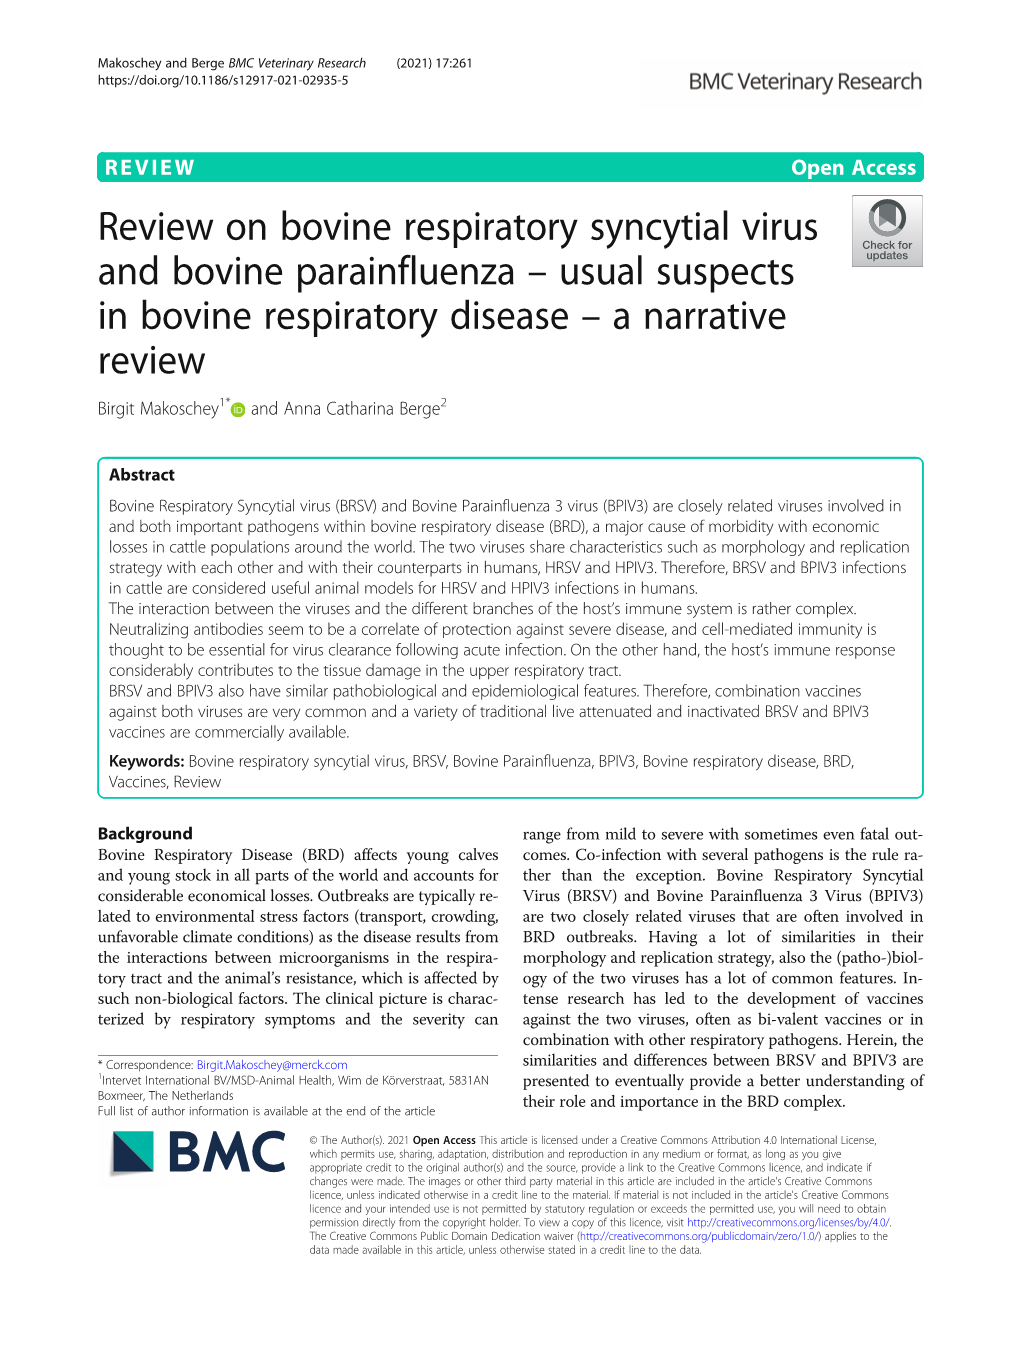 Review on Bovine Respiratory Syncytial Virus and Bovine Parainfluenza